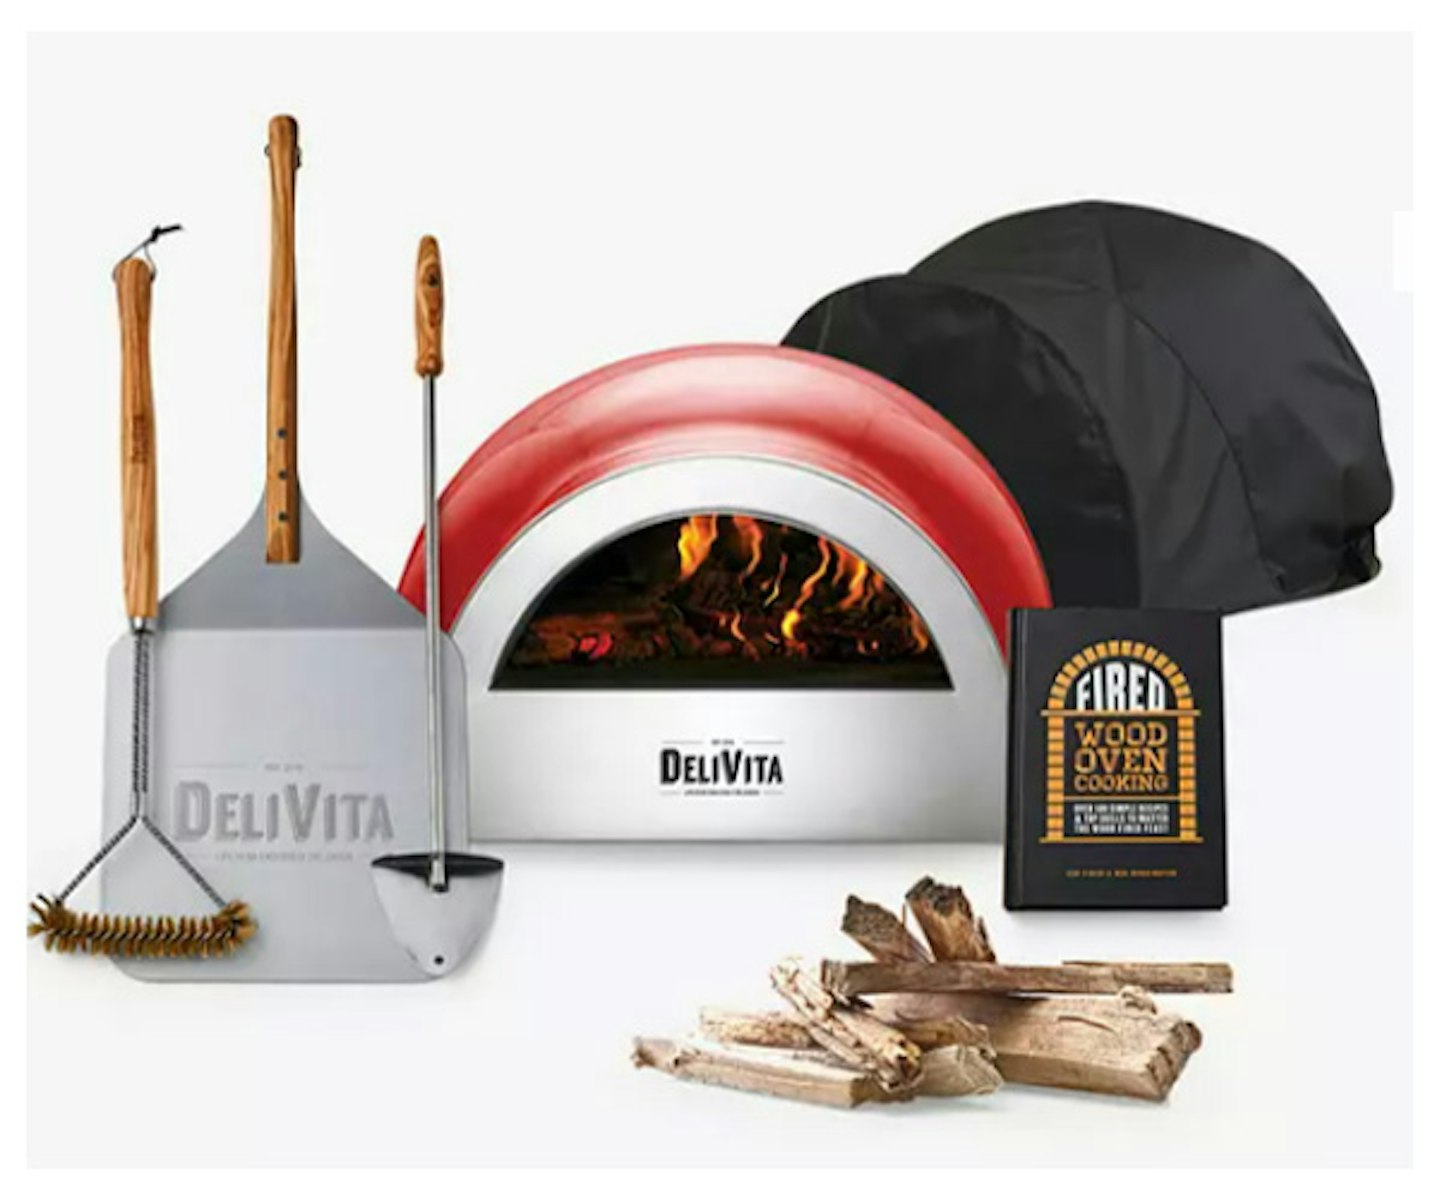 DeliVita Pizza Lover’s Collection Wood-Fired Portable Outdoor Oven